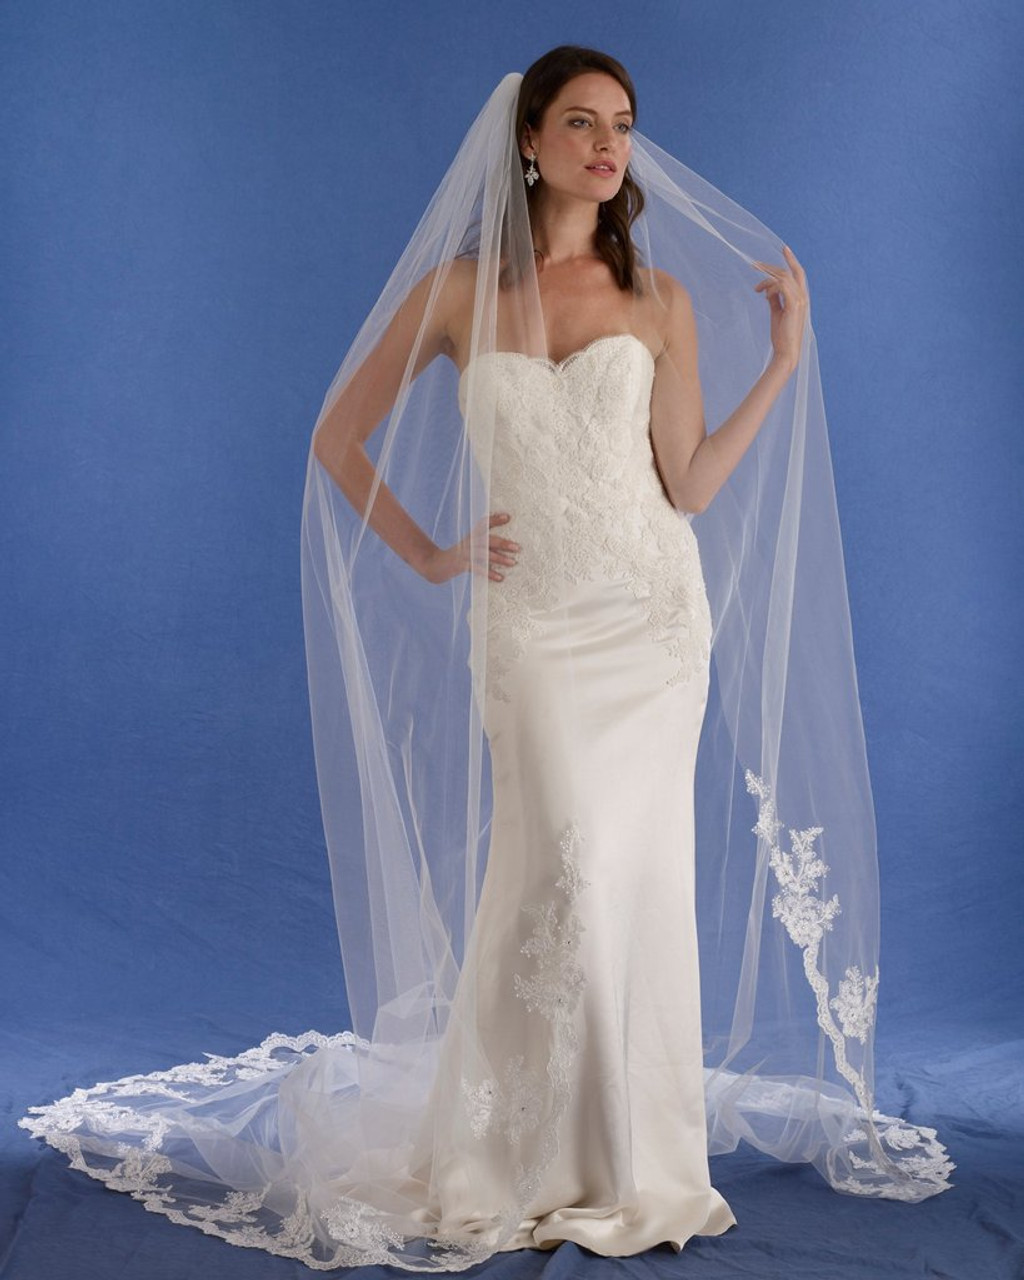 Marionat Bridal Veils 3752 - 120” Scalloped lace veil with scattered rhinestones. Lace starts 44” down